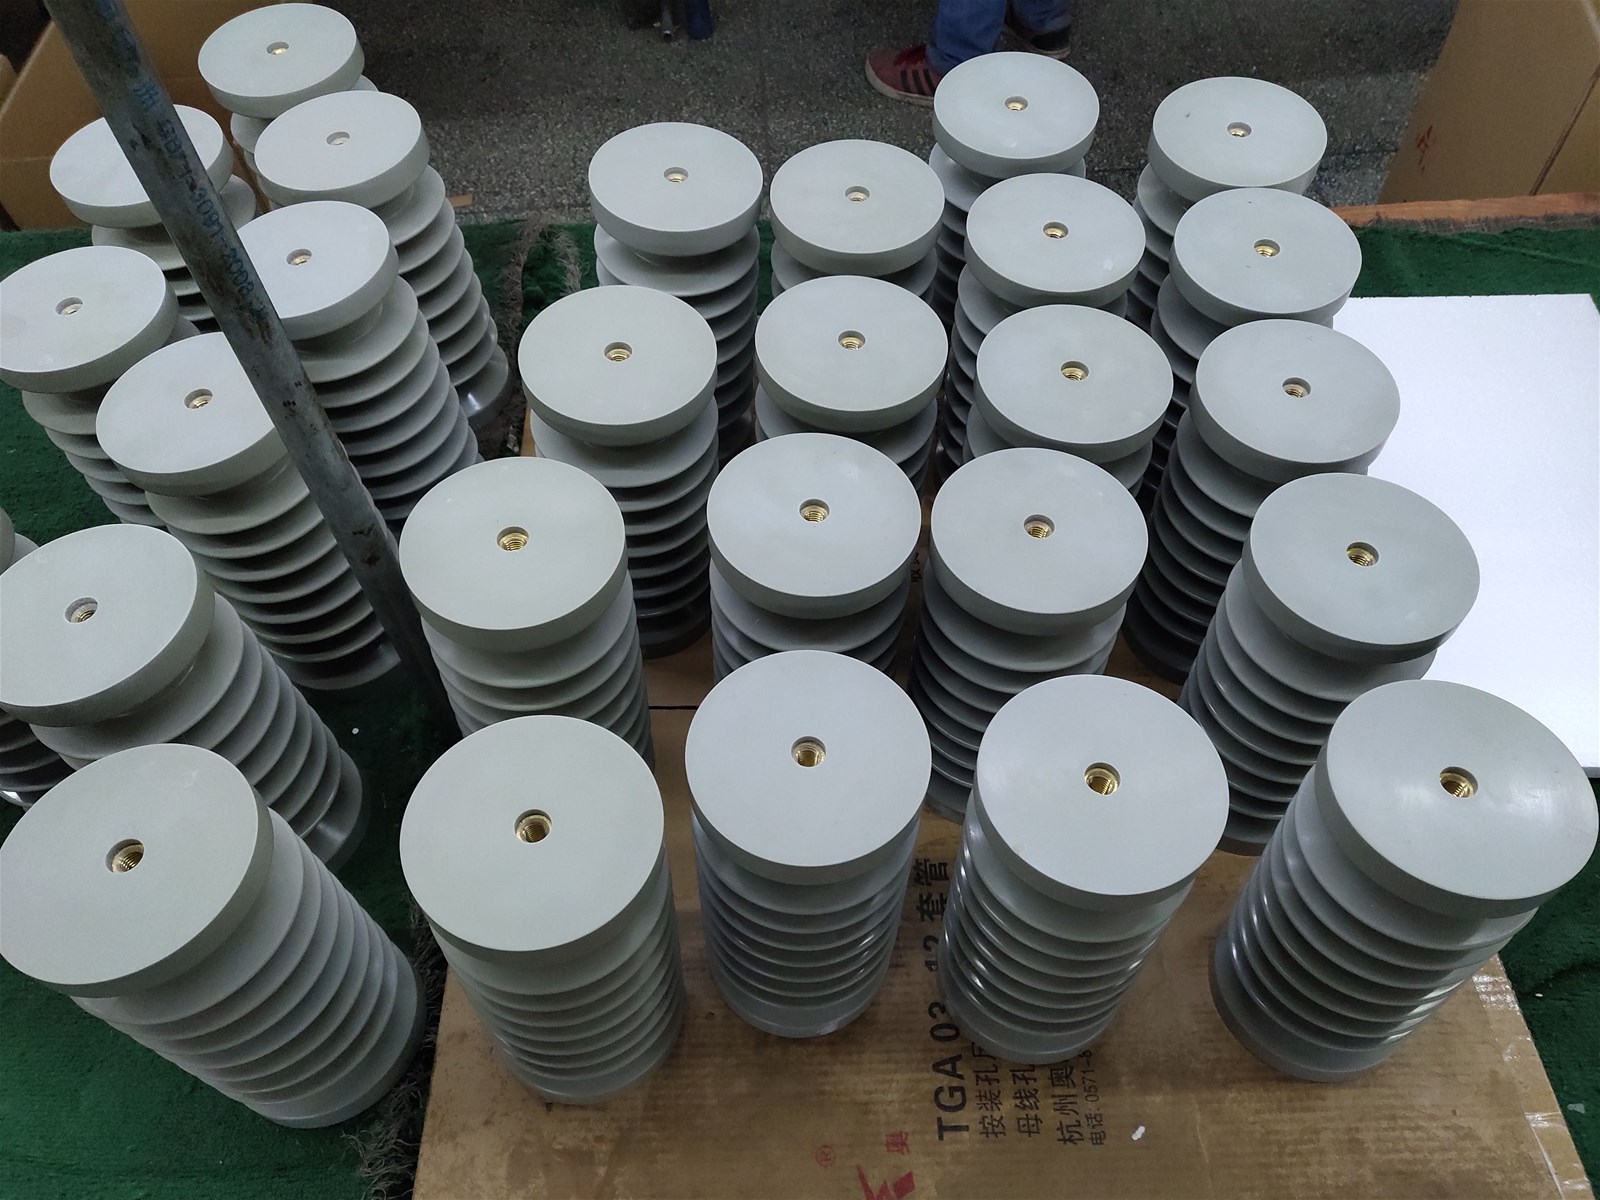 Cycloaliphatic Insulators for indoor and outdoor distribution 48 kV through 345 kV